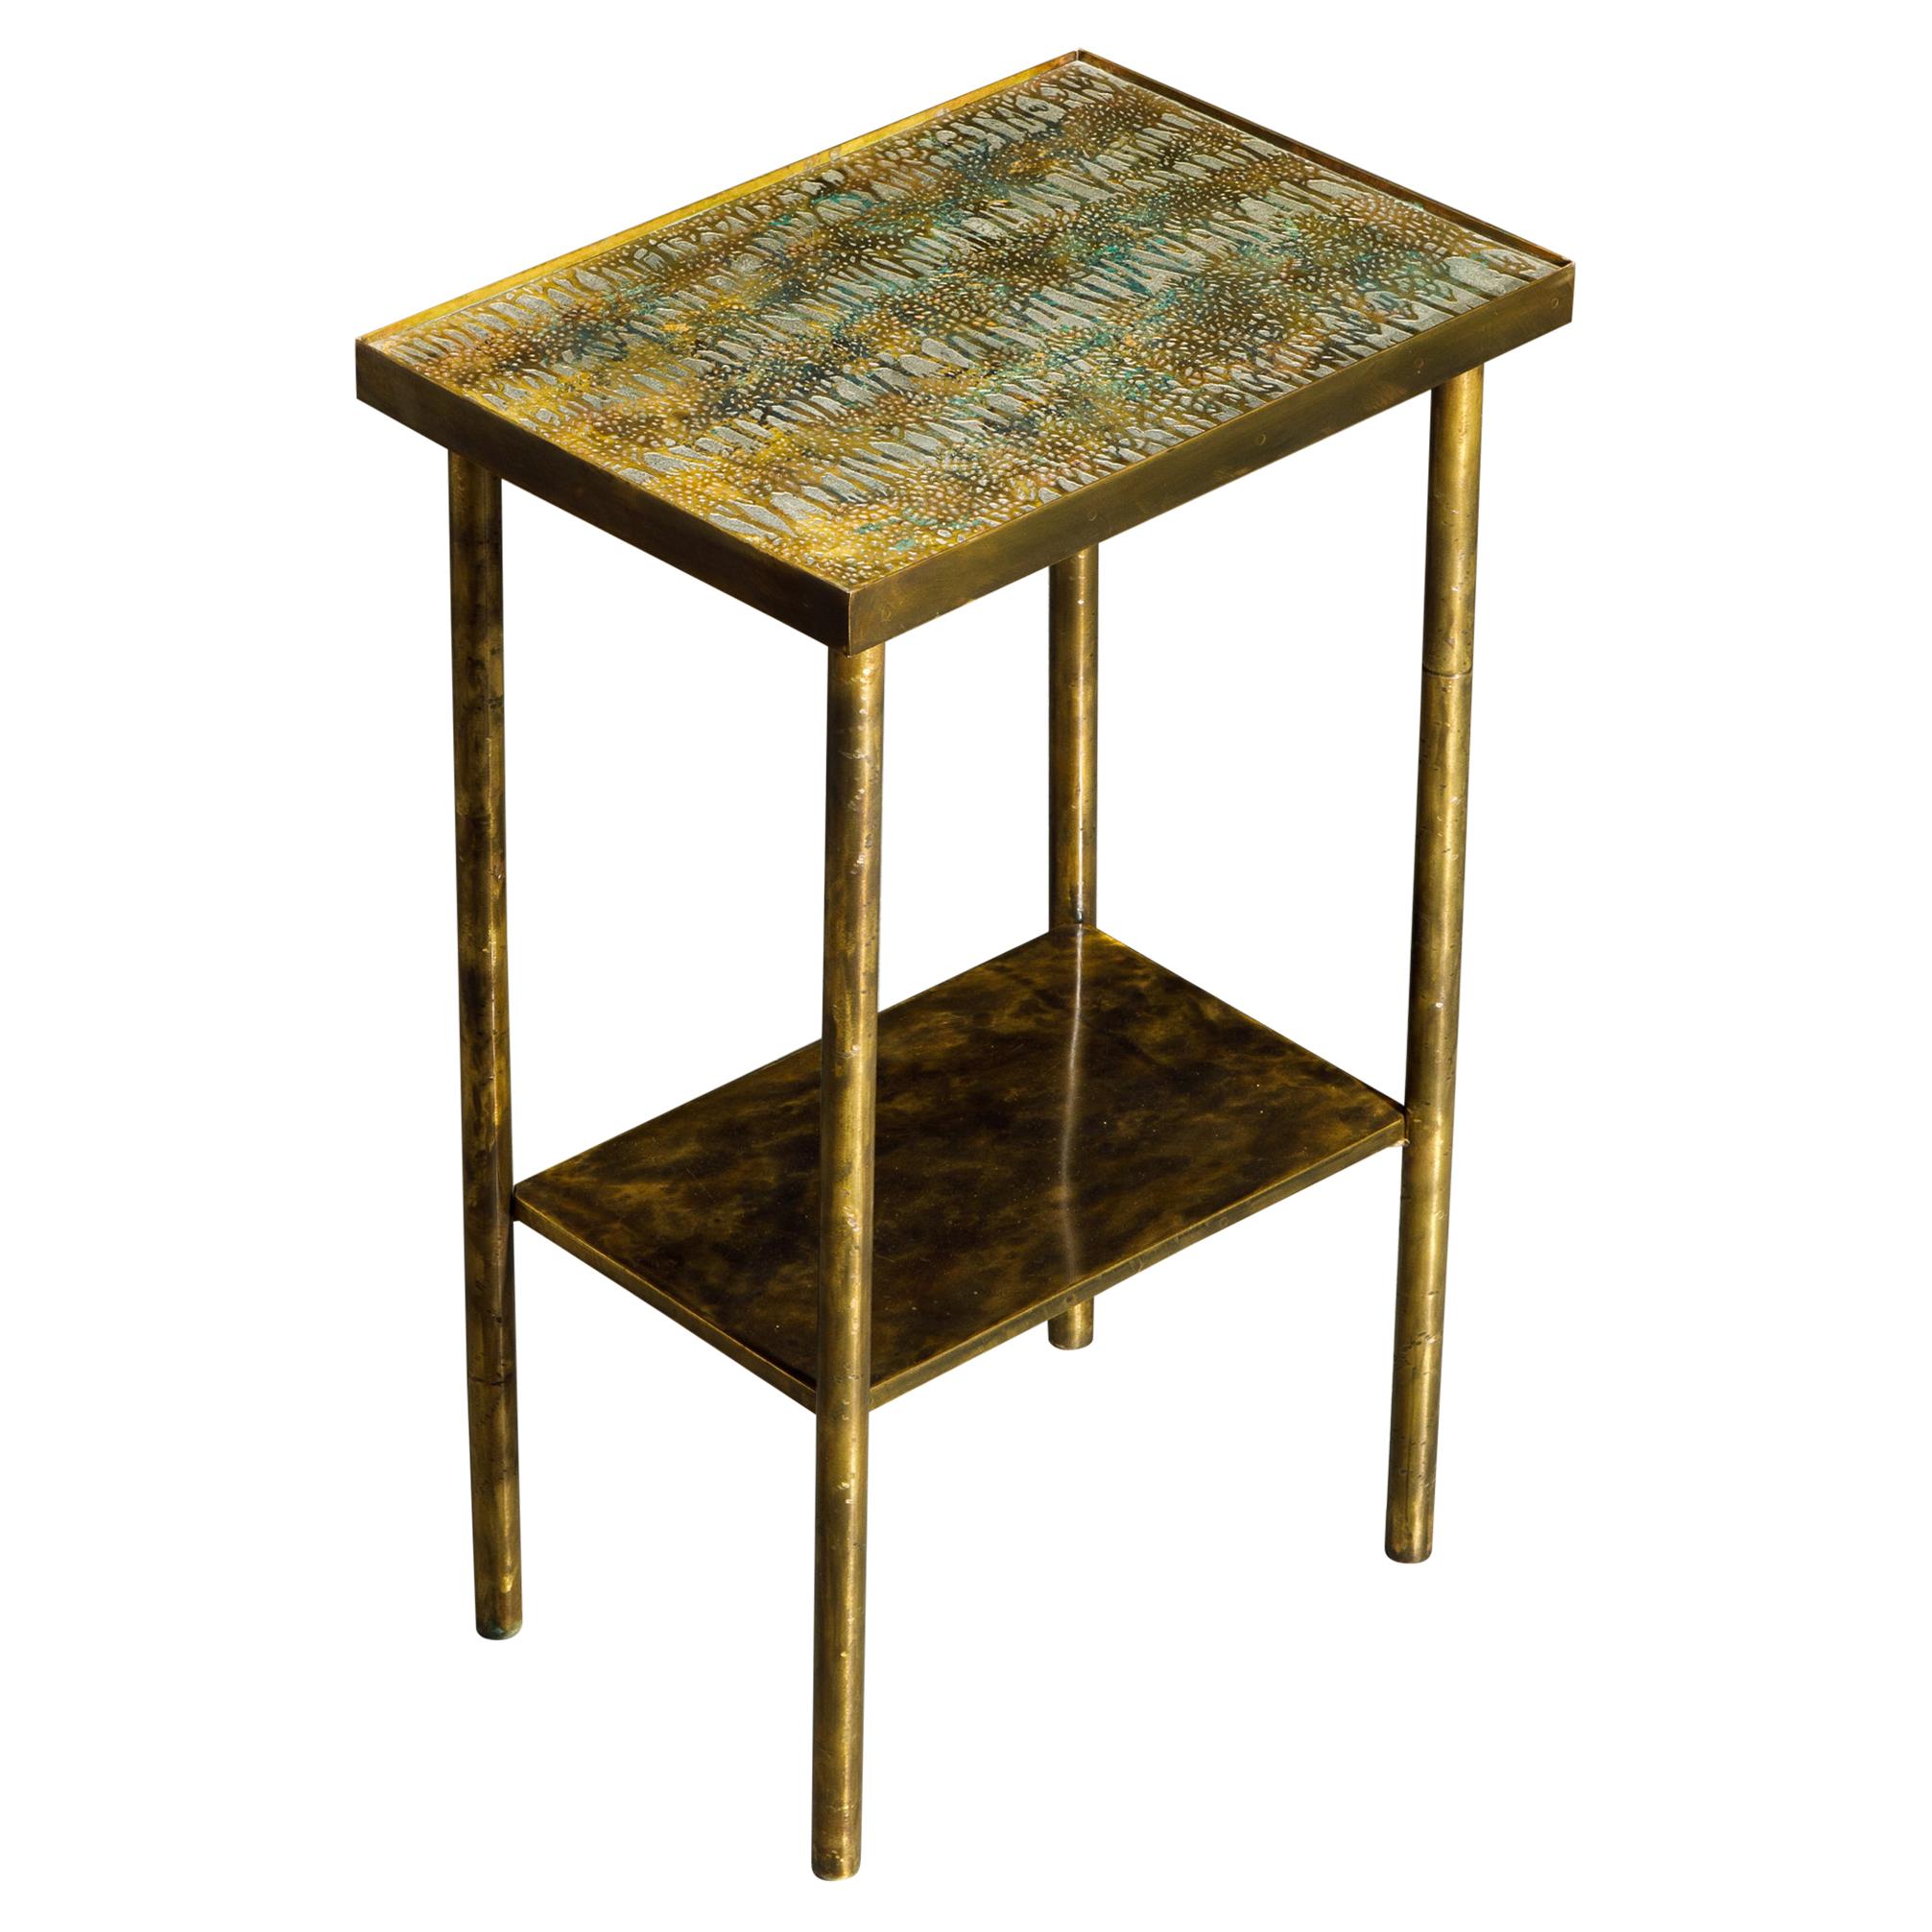 Eternal Forest Bronze Drinks / Laptop Table by Philip and Kelvin LaVerne, c 1965